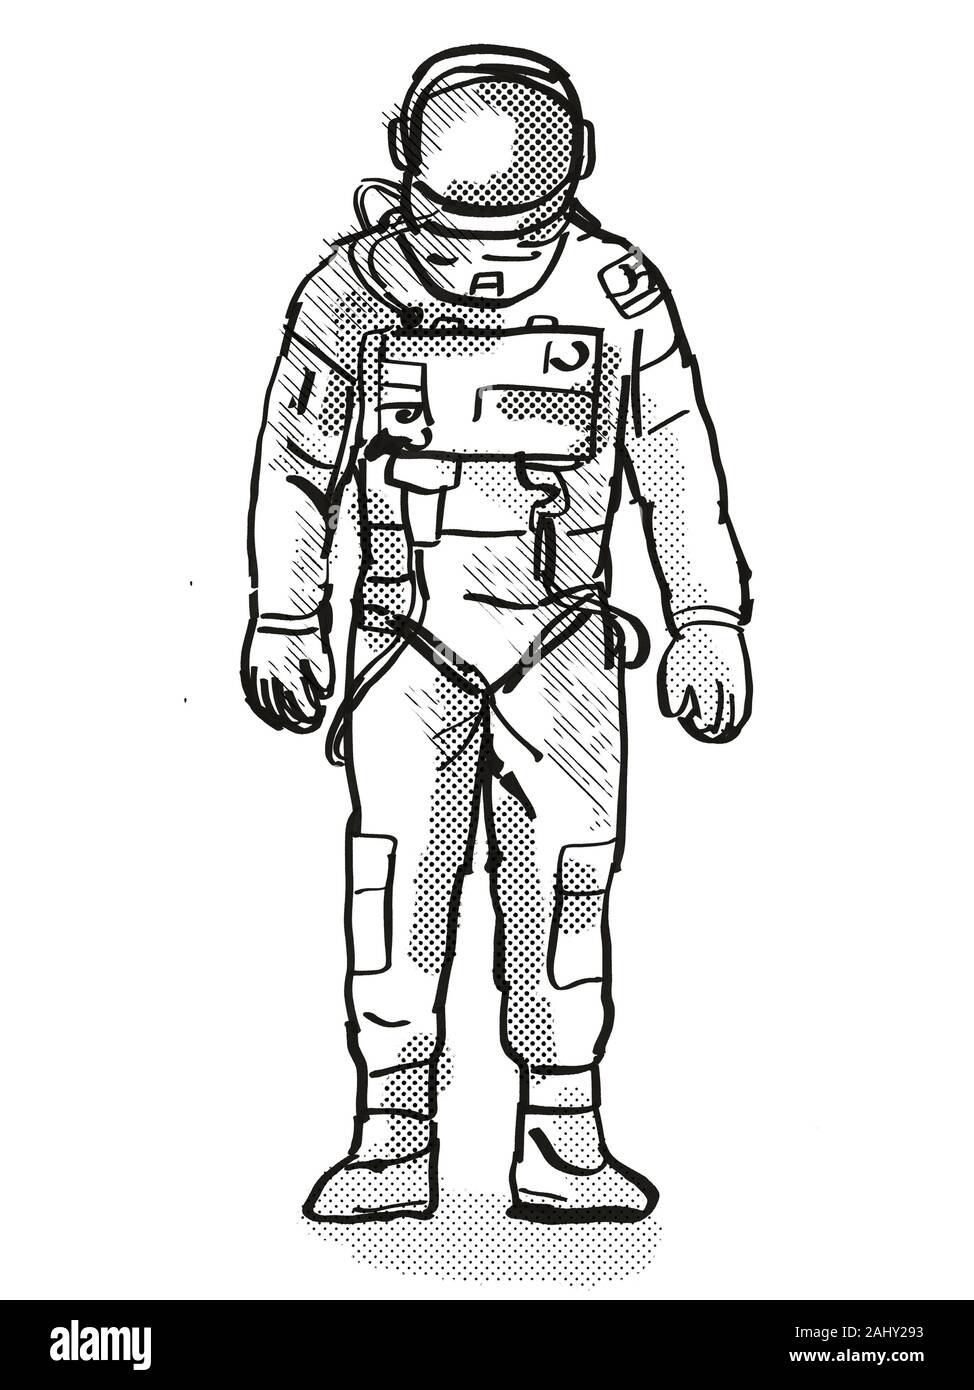 How To Draw A Space Suit Easy Step By Step najasfashion